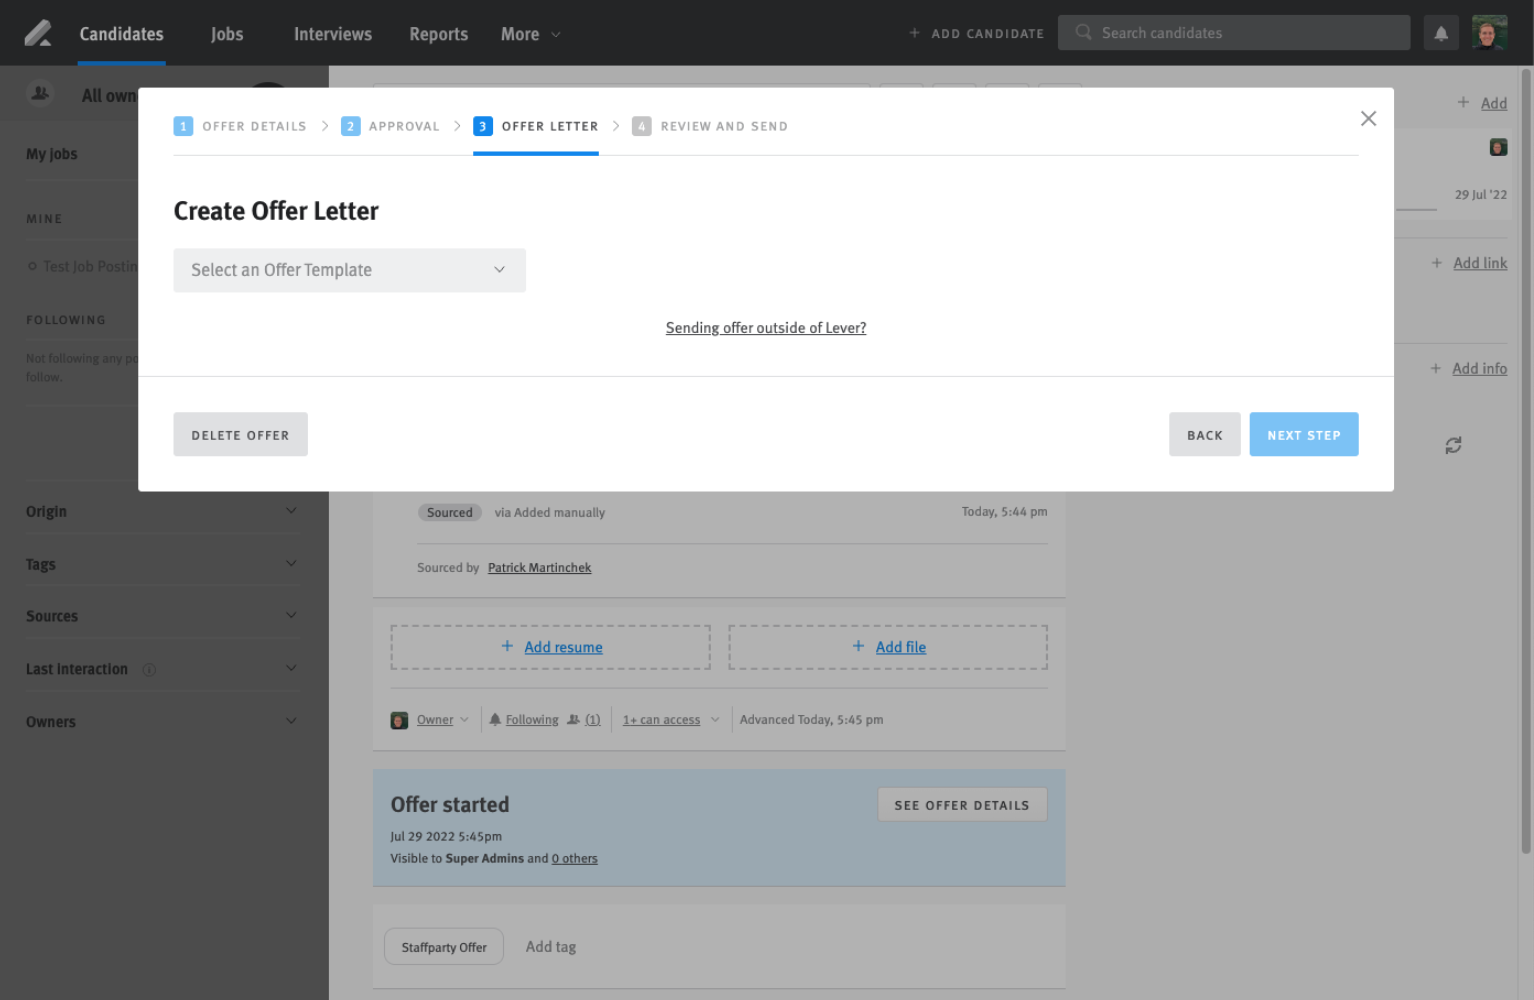 Lever create offer Letter modal with select an offer template dropdown menu.